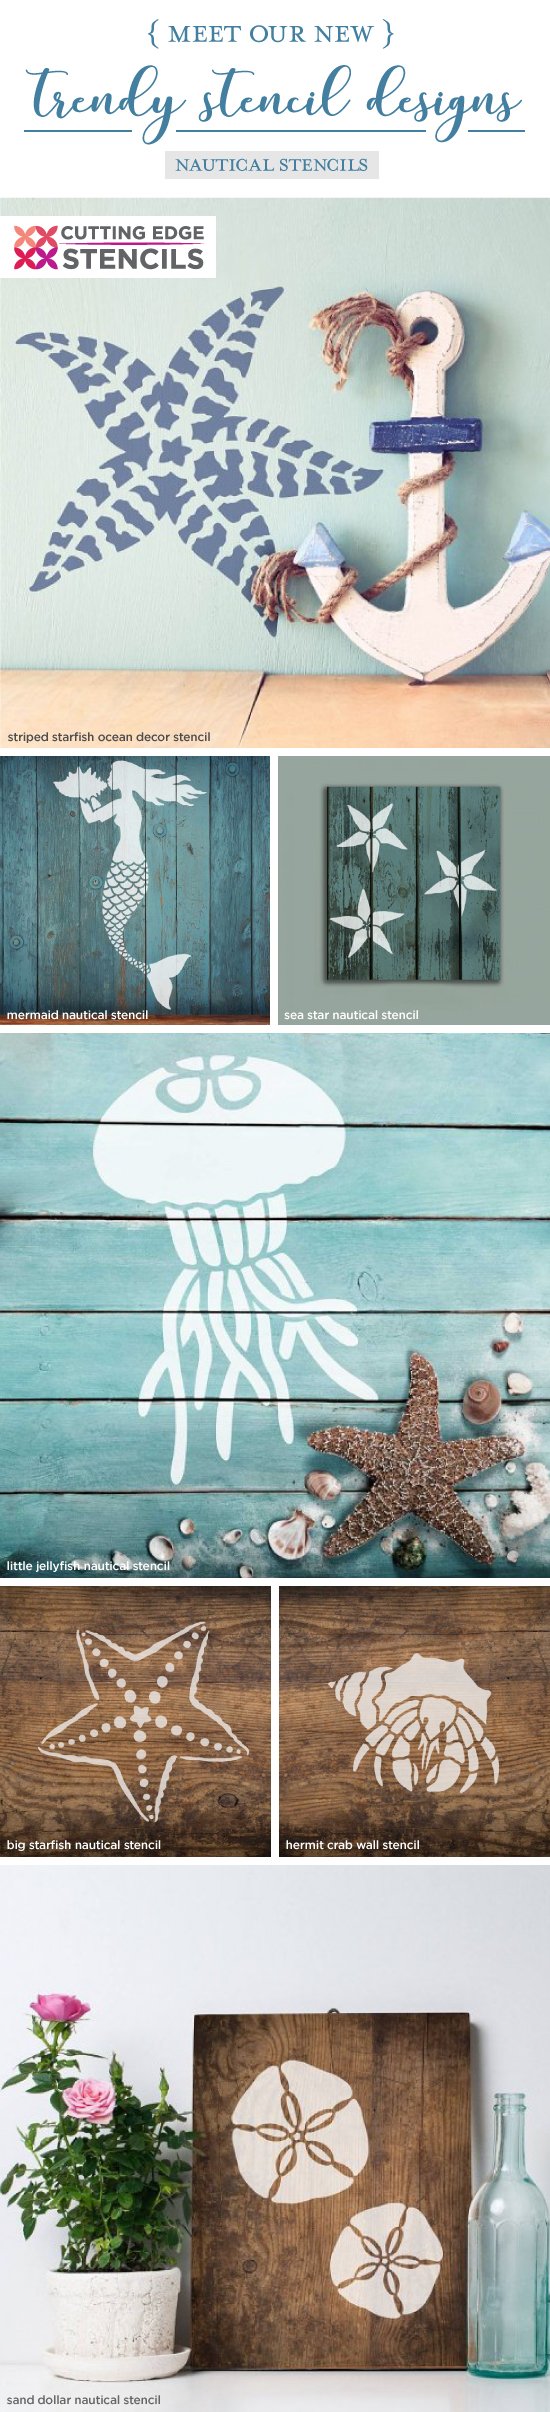 Cutting Edge Stencils shares a New wall stencil collection that includes beach inspired and nautical patterns for walls, furniture, and crafts. http://www.cuttingedgestencils.com/wall-stencils-stencil-designs.html